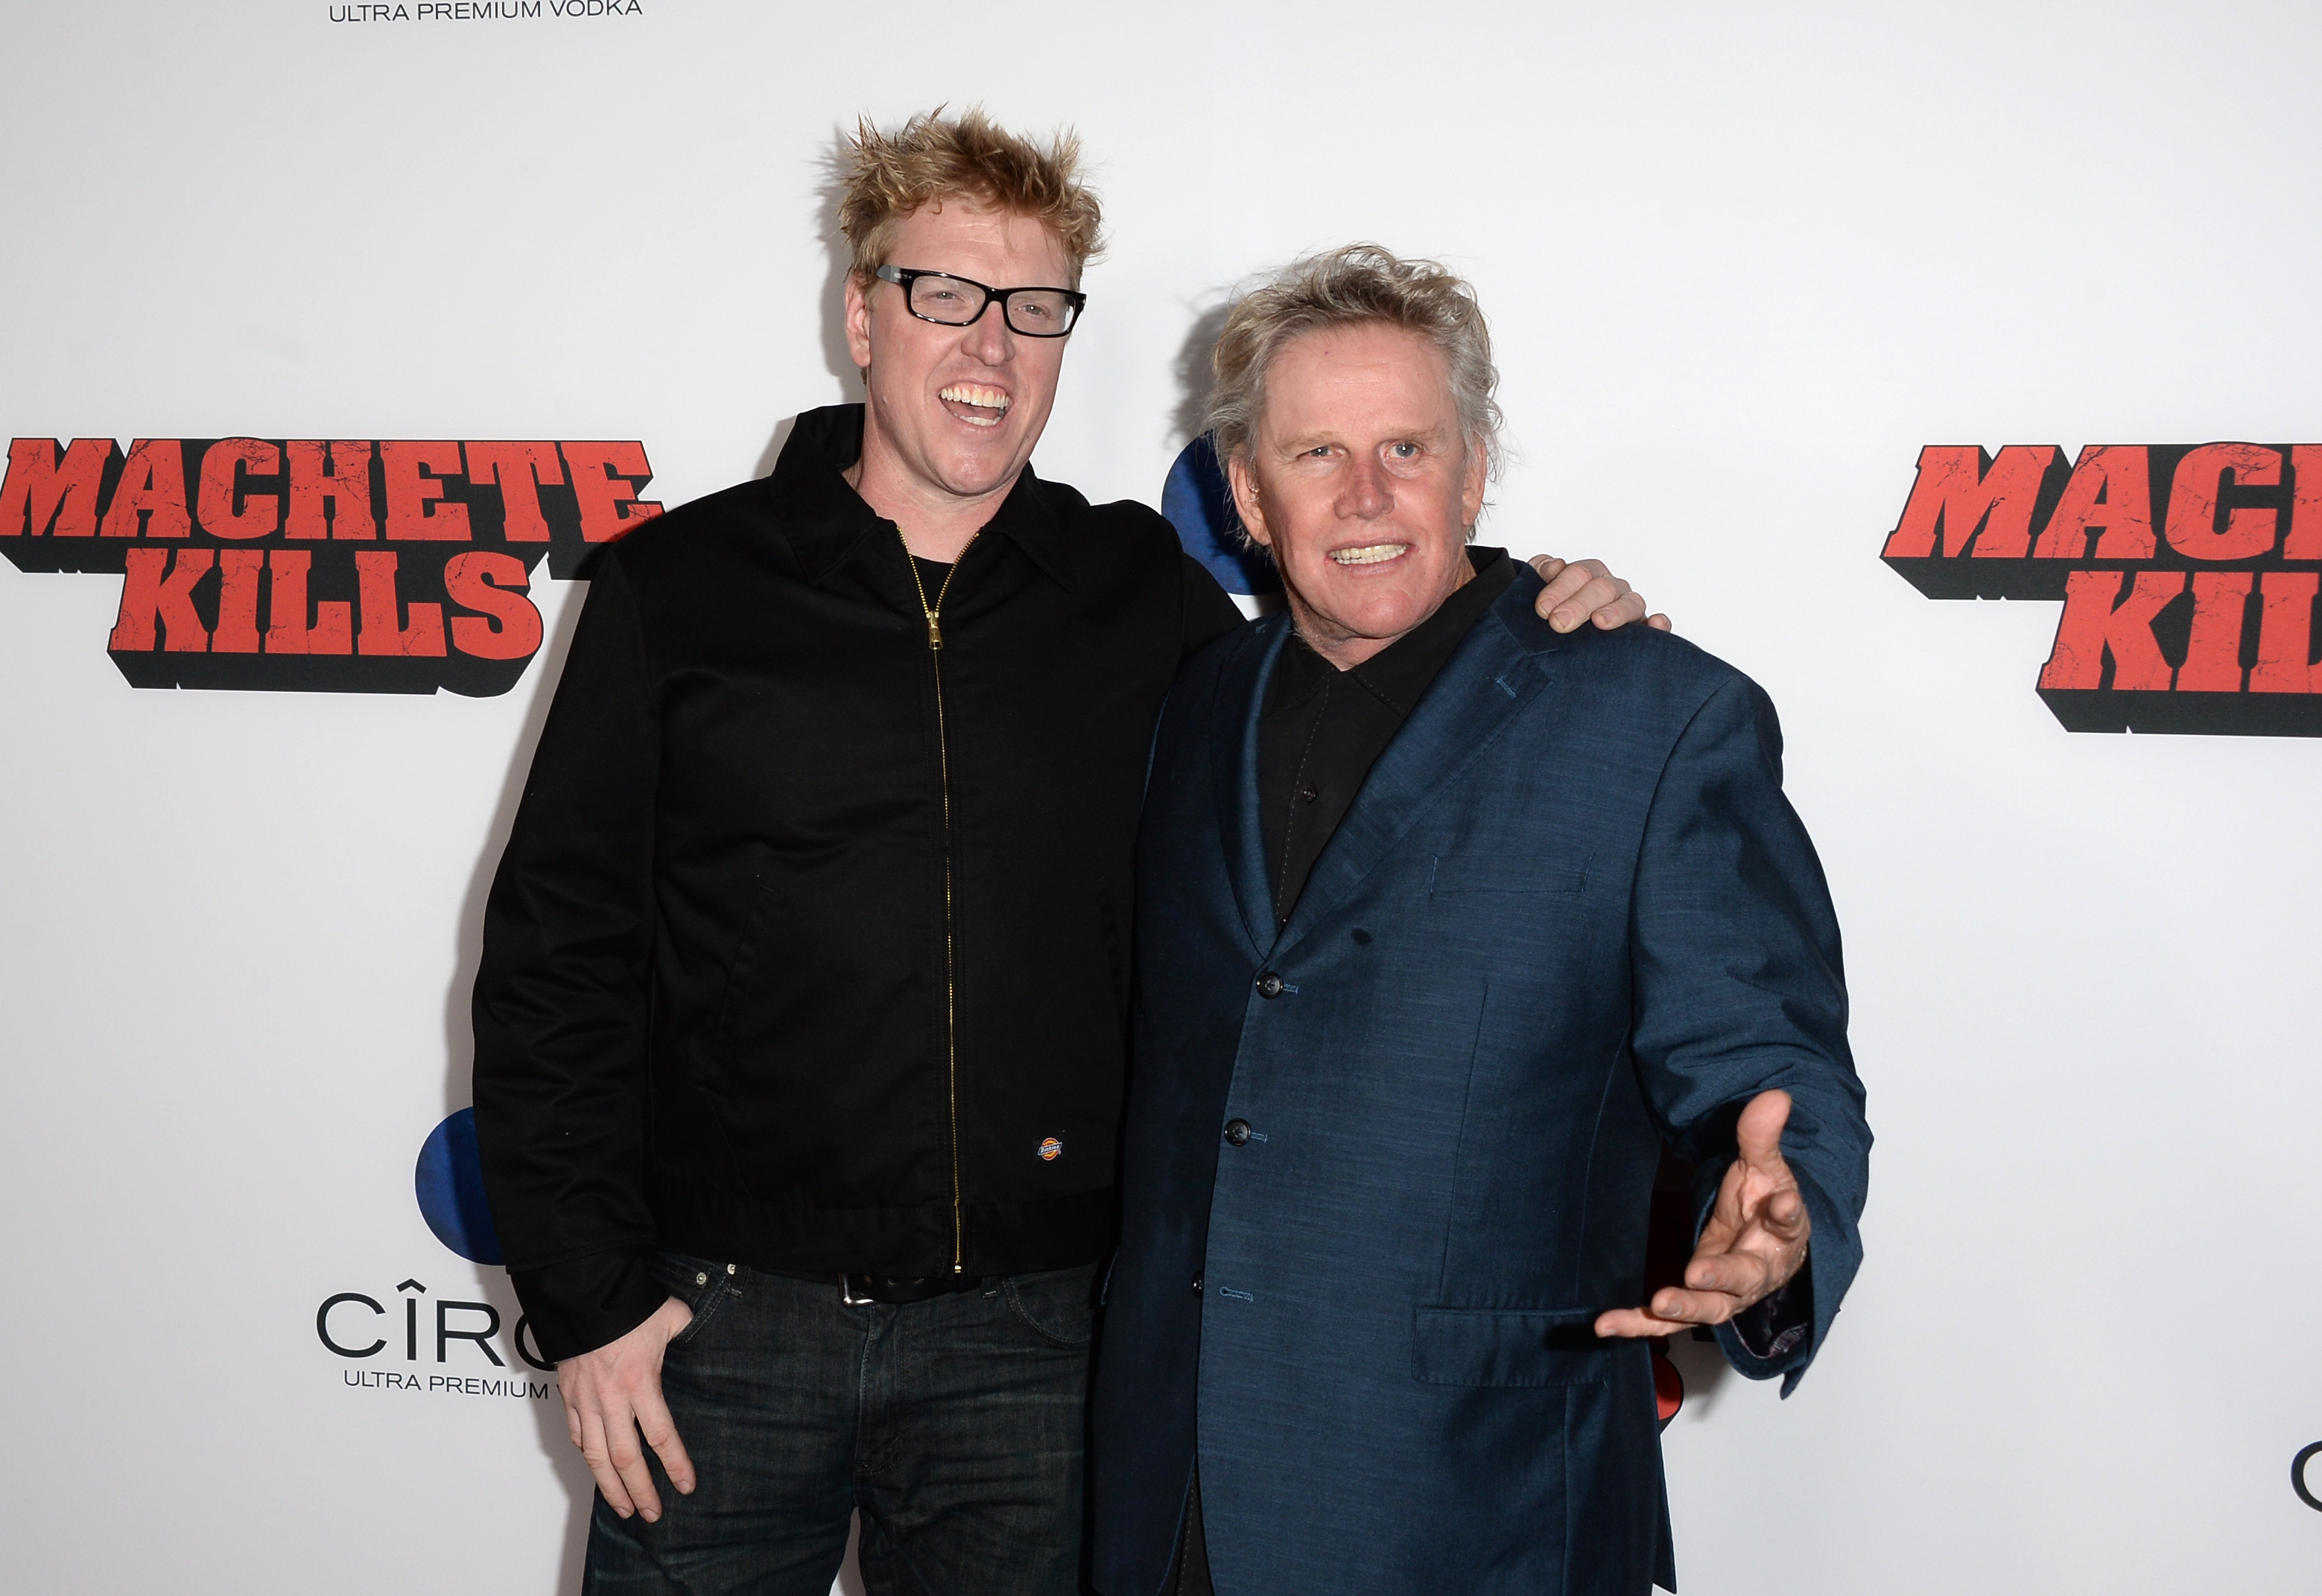 Jake and Gary Busey arrive at the premiere of Open Road Films' "Machete Kills" at Regal Cinemas L.A. Live on October 2, 2013, in Los Angeles, California. | Source: Getty Images